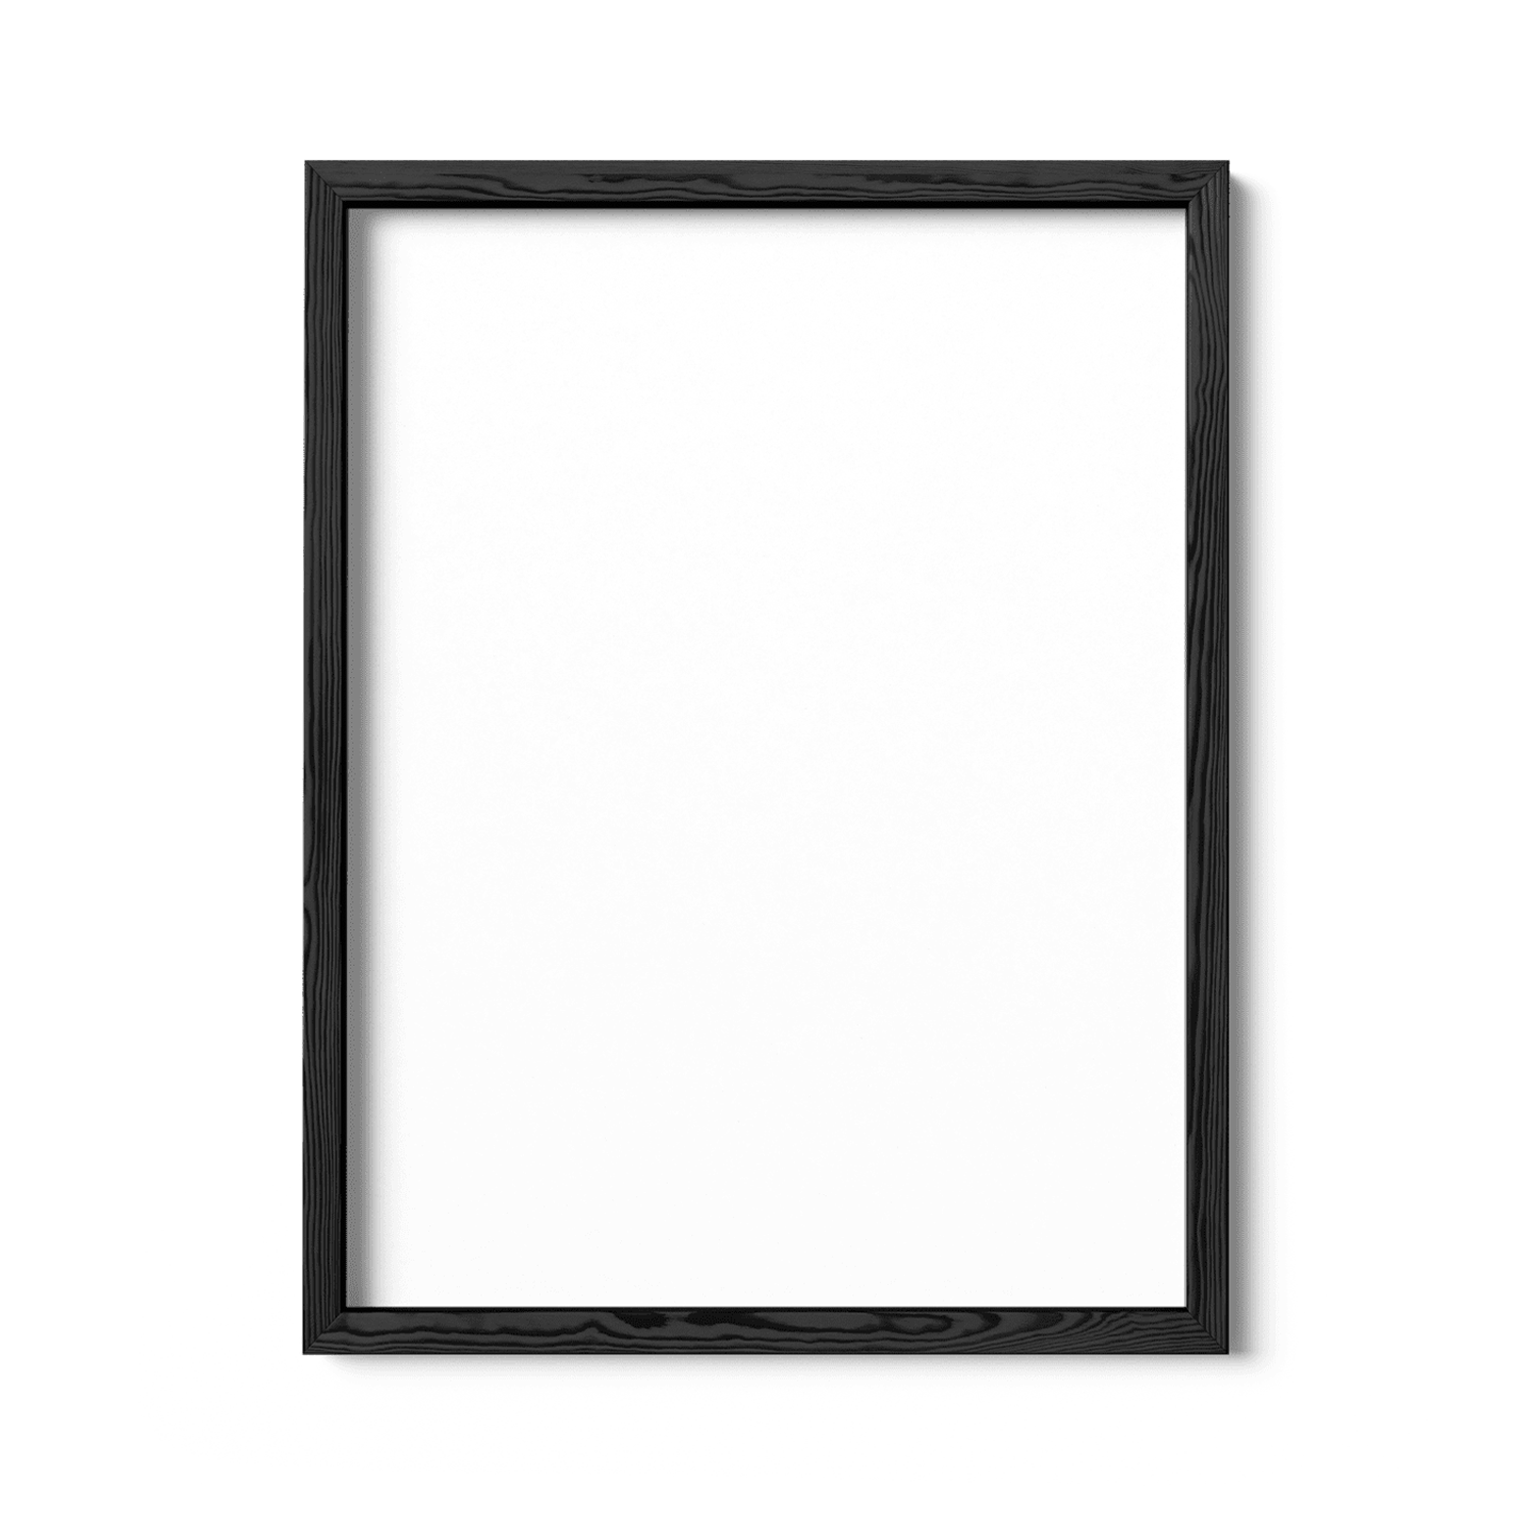 Professional Basketball Arenas Scratch-Off Chart Frame